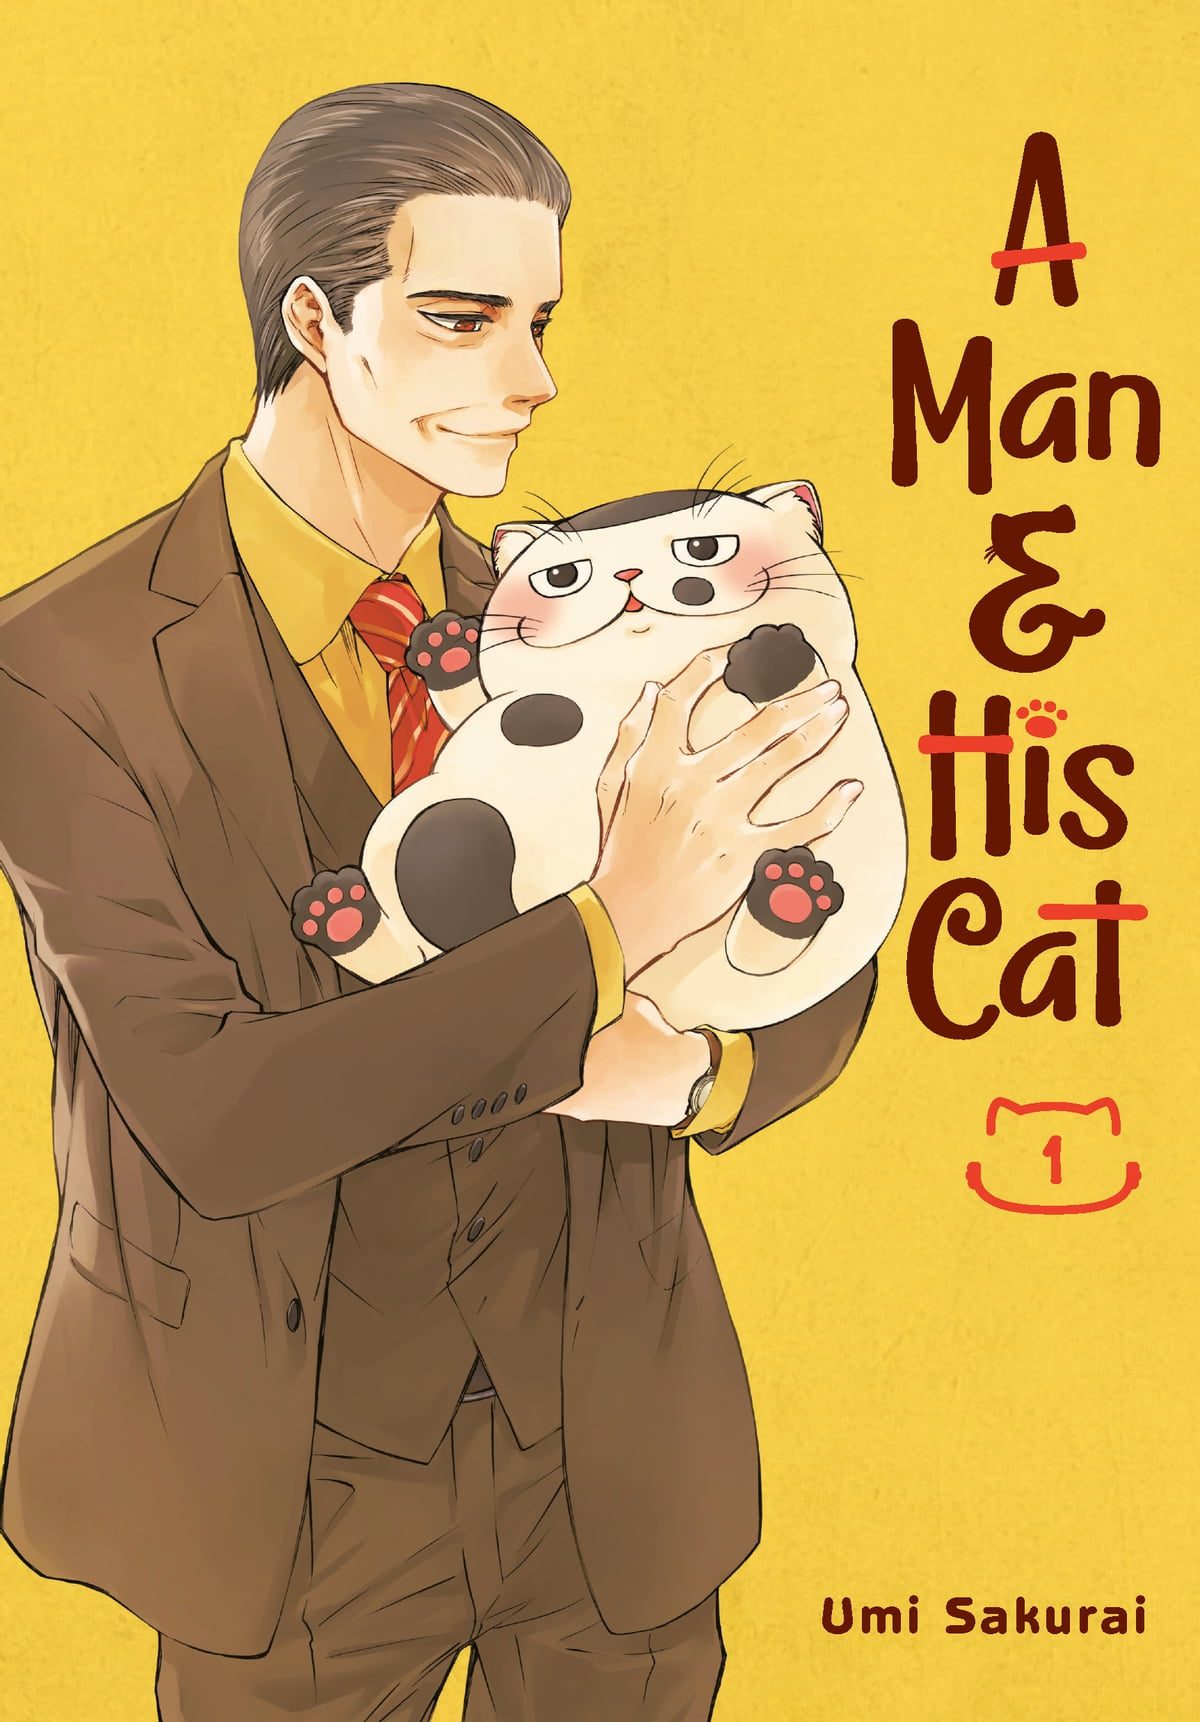 A Man & His Cat book cover